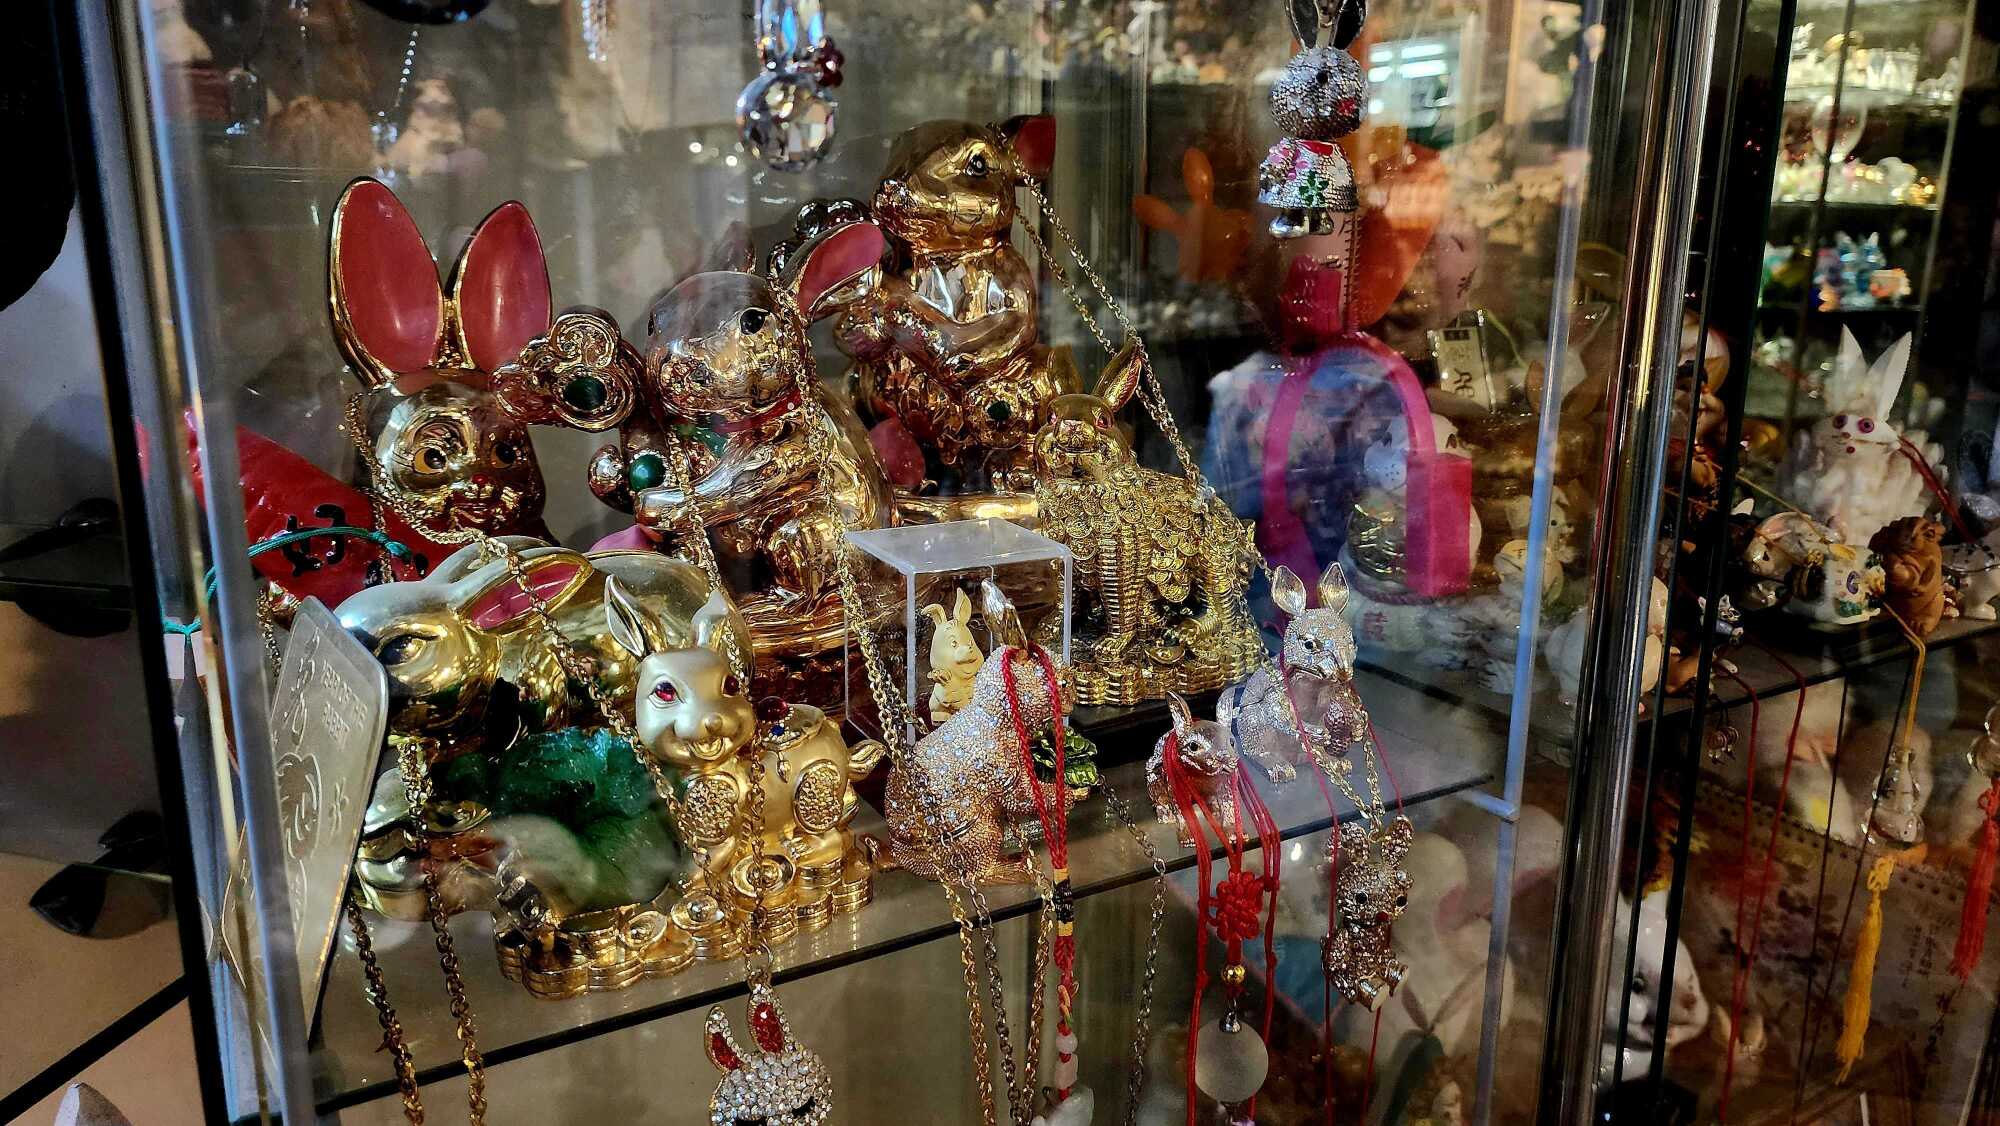 A display case full of ornate rabbits 